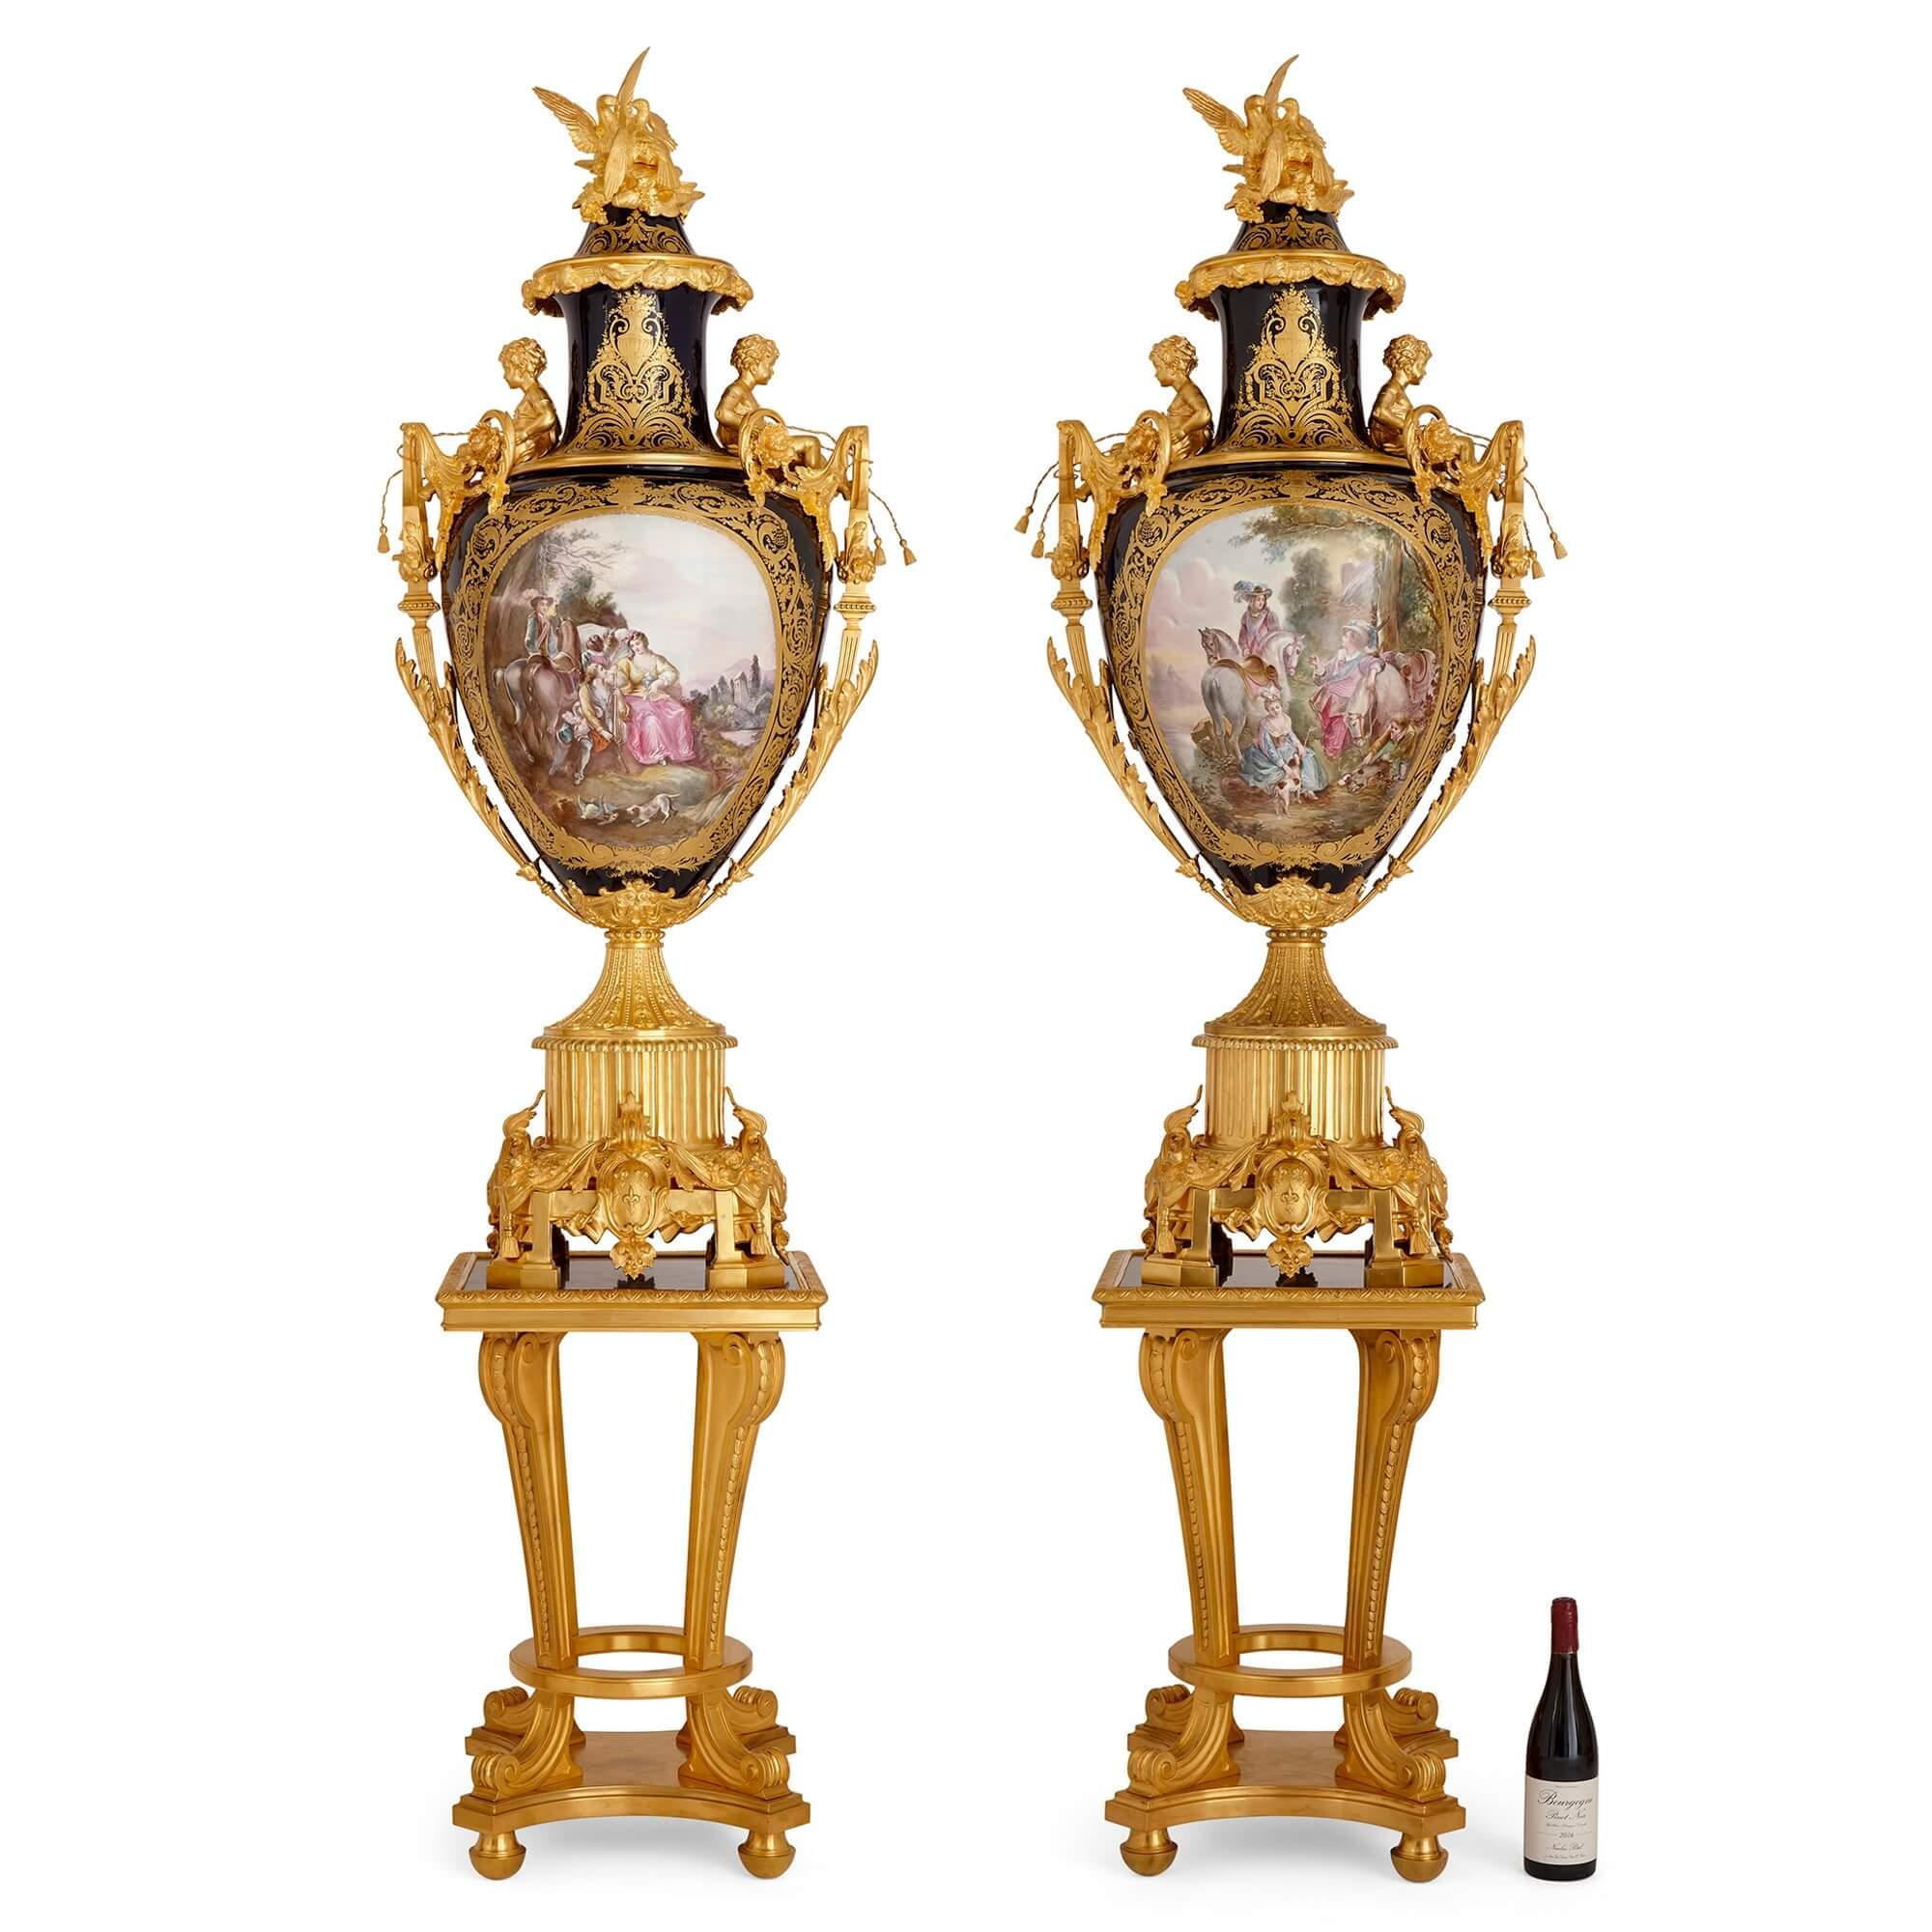 Pair of Large Gilt-Bronze Mounted Sèvres-style Porcelain Vases with Pedestals For Sale 6